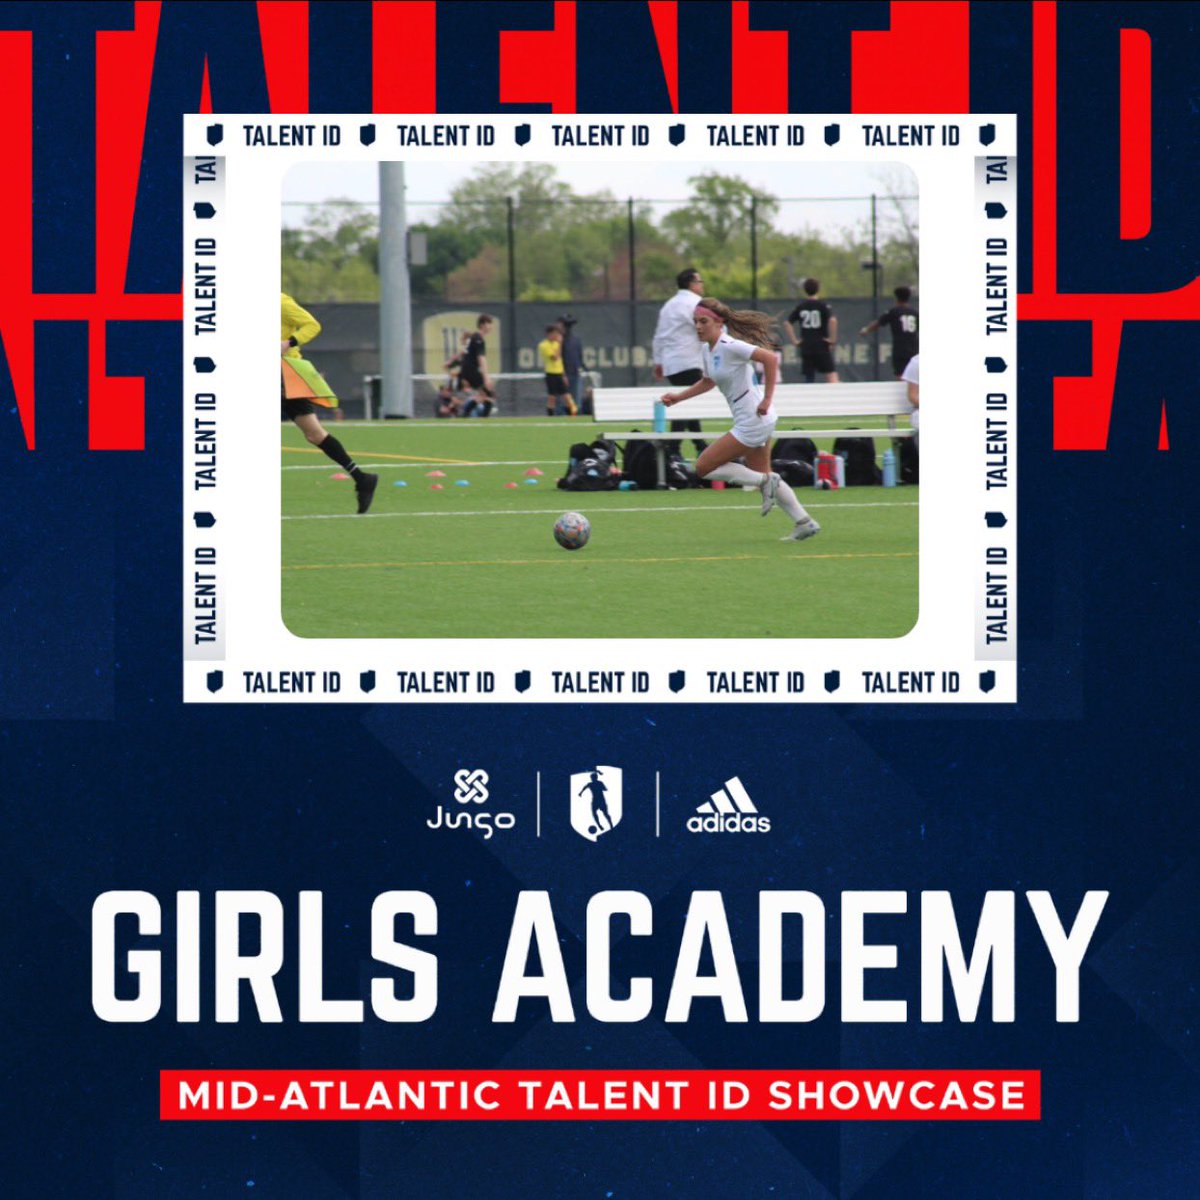 I can't wait to play with my teamates and other talented players at the Mid-Atlantic #GATalentID i'm so exited for this opportunity and can't wait!! @GAcademyLeague @bobbypup @tt7 @TSJ_FCVirginia